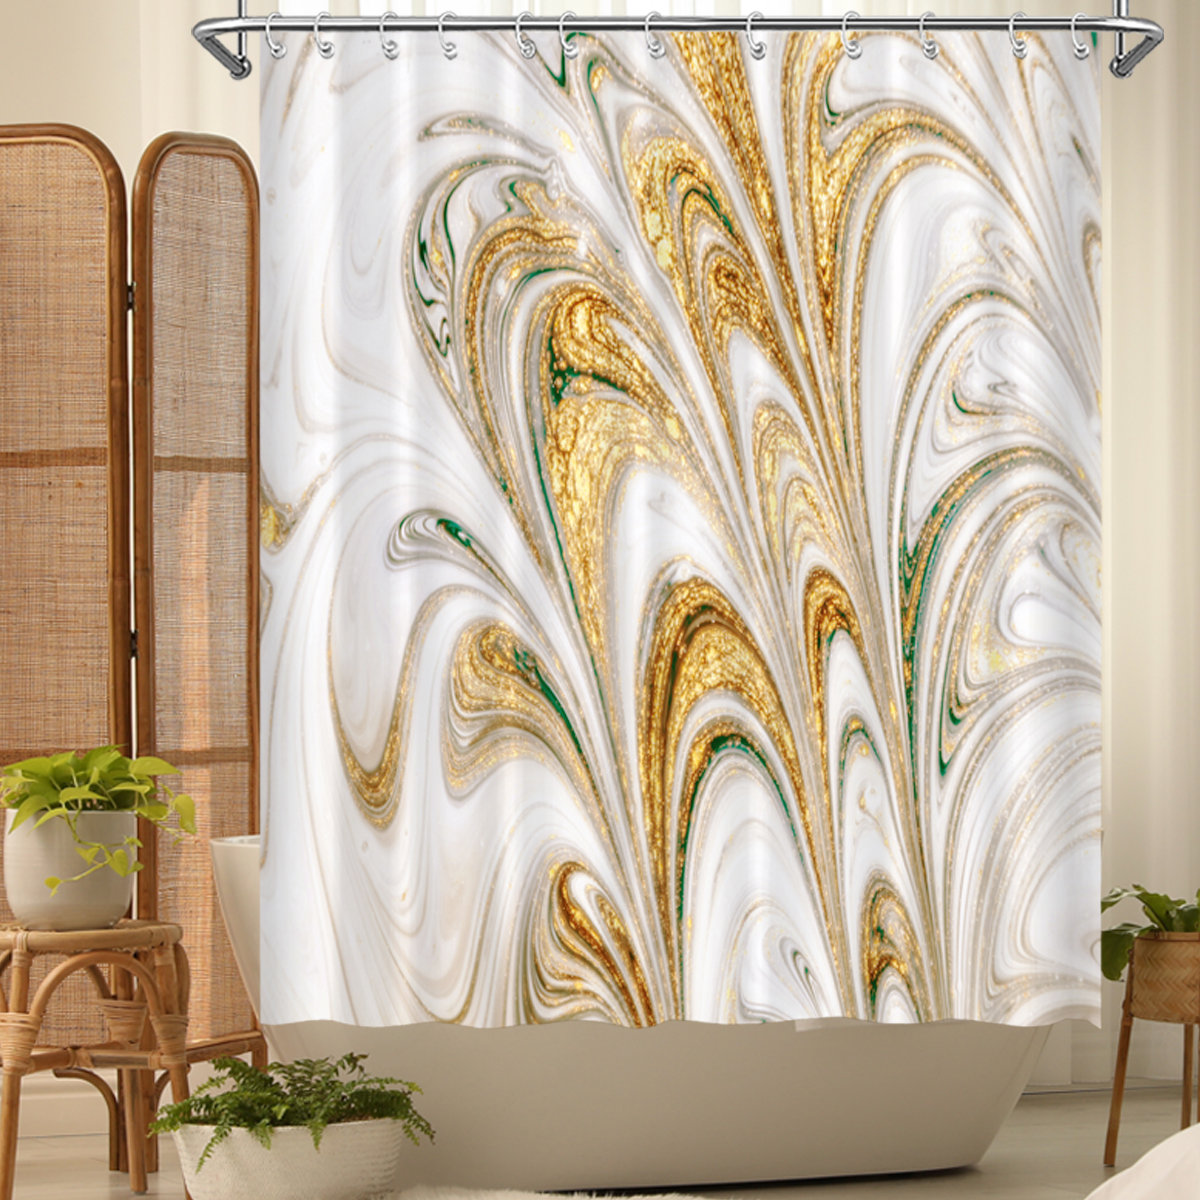 Polyester Fabric Beautiful Colorful Butterfly Shower Curtain Liner Bathroom Mat 